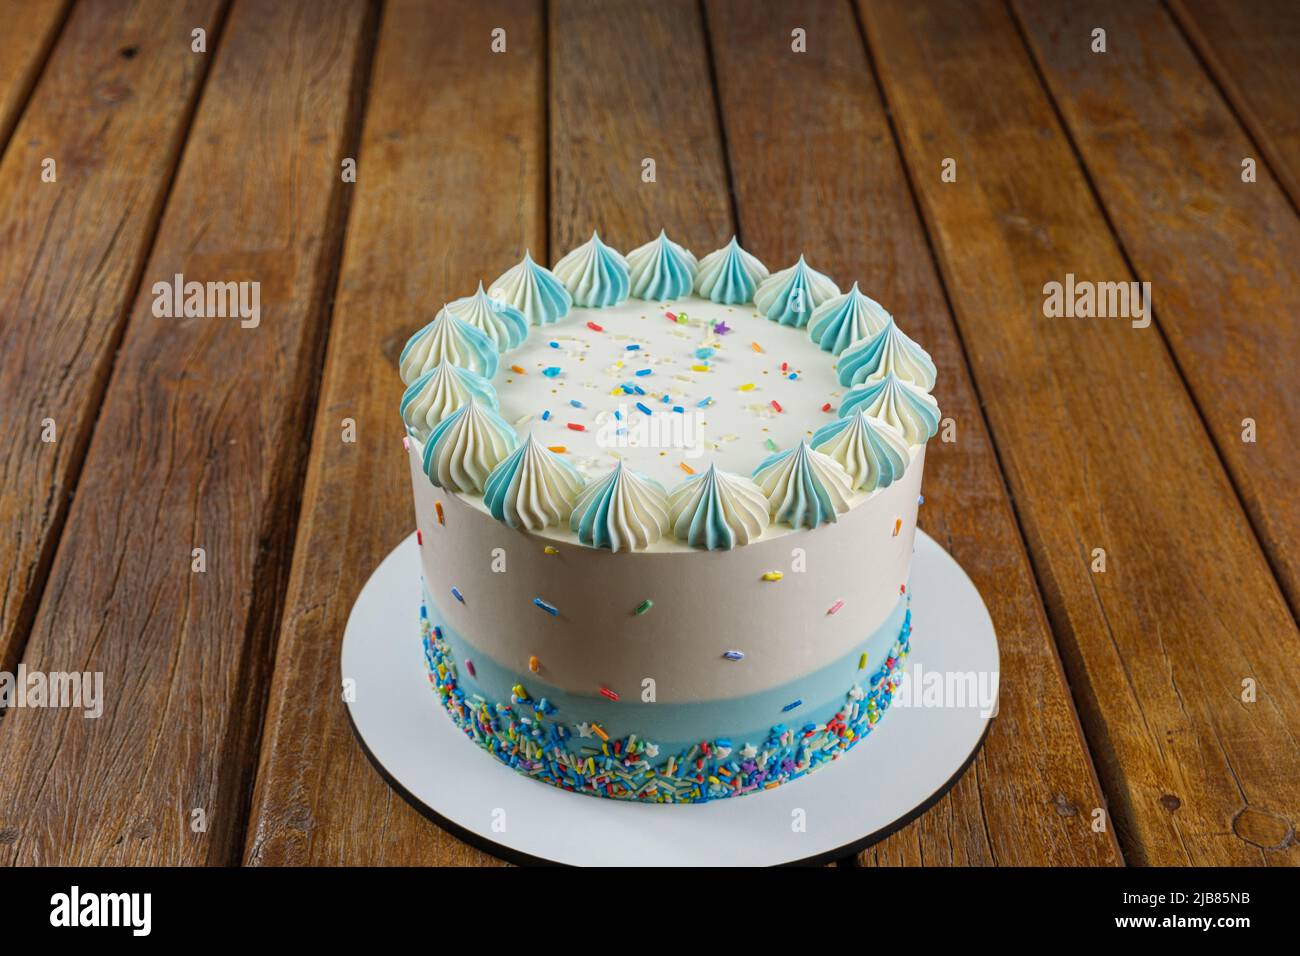 Vanilla cake with butter cream frosting in the shape of zefir. Stock Photo